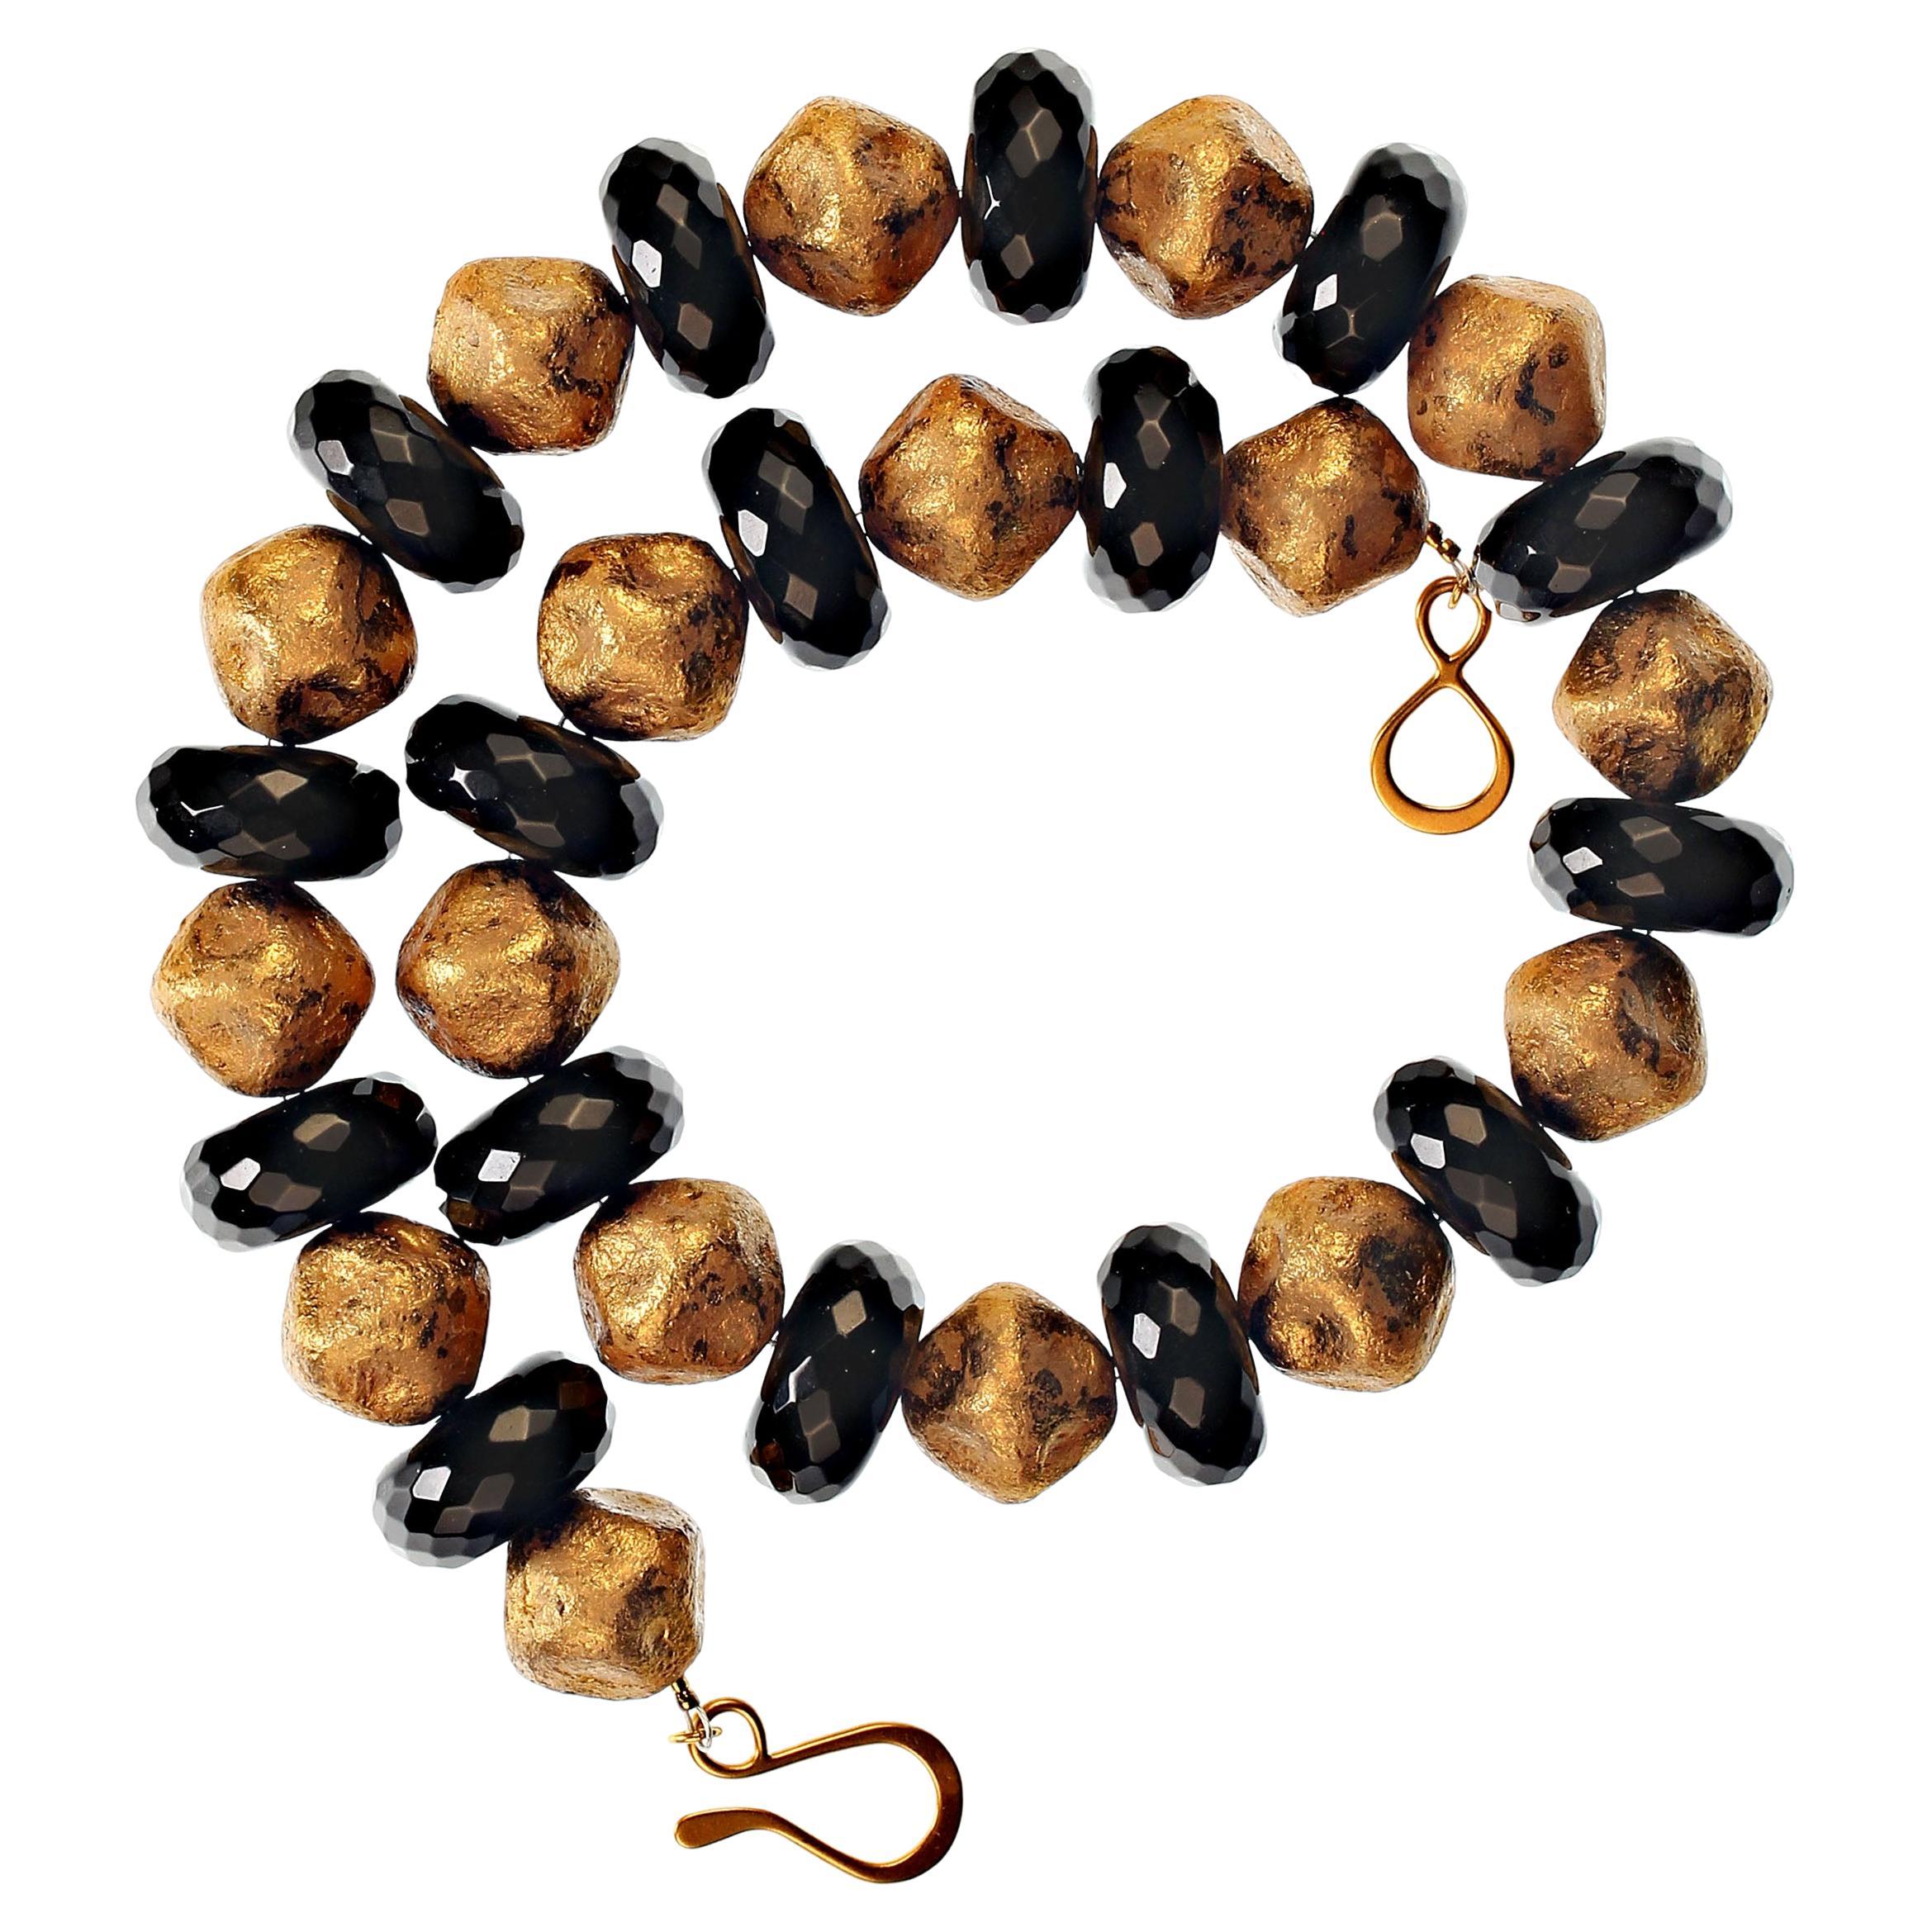 Striking look of Elegance and Style! Wear this necklace of Black Onyx rondelles and antique gold Czech beads as your pick of the day, week, year. The 19 MM Black Onyx rondelles are faceted and highly polished. The antiqued gold Czech beads are